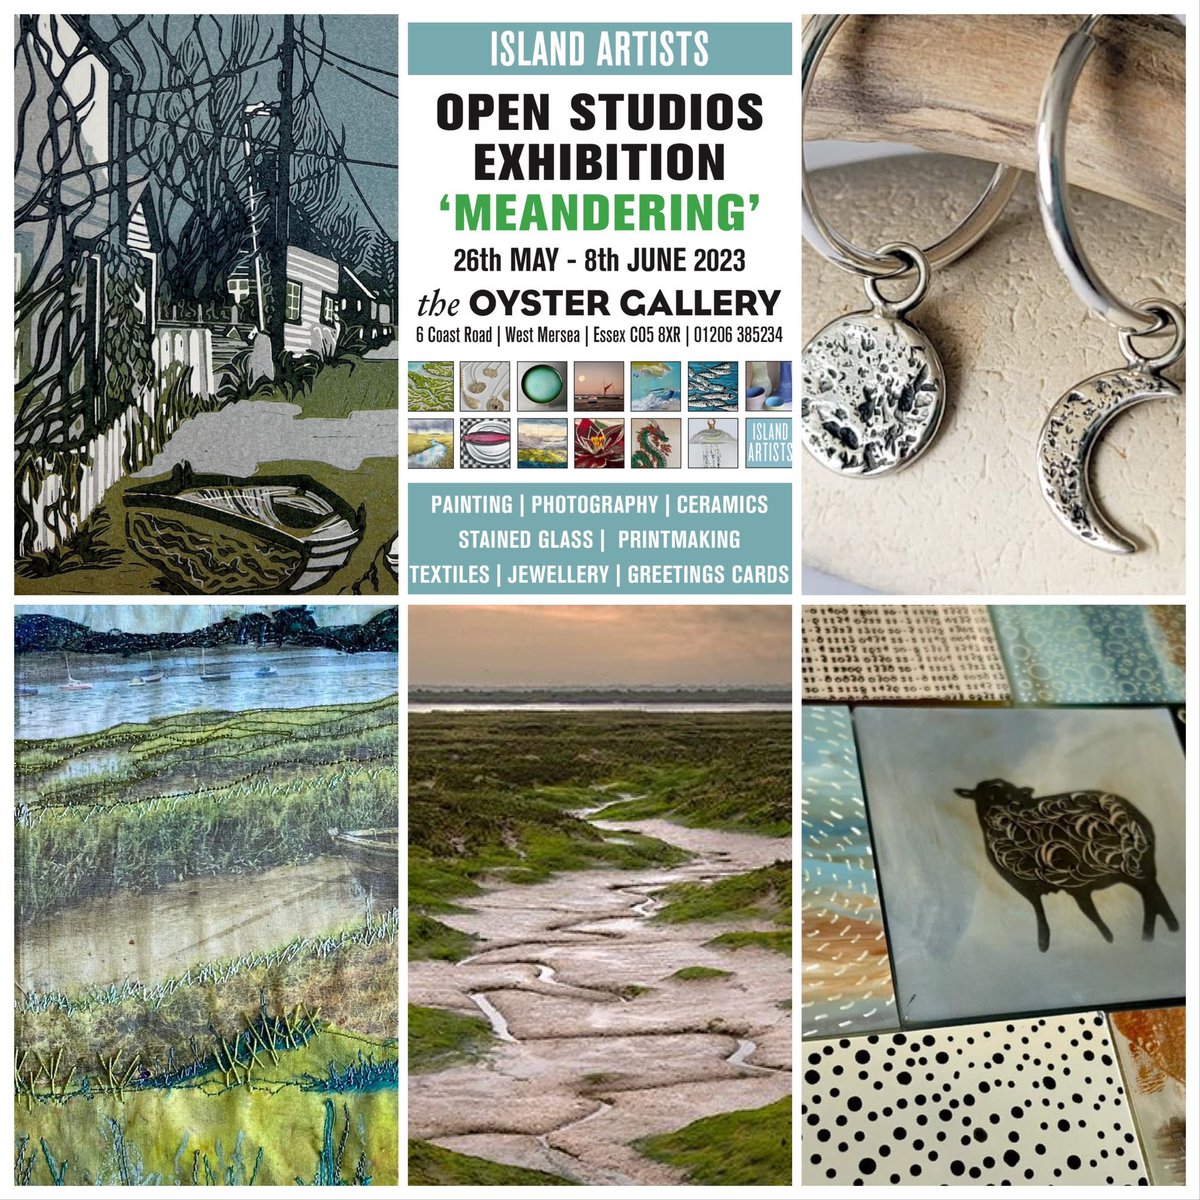 Island Artists Open Studios coming up 26-28th May with some exciting new work, save the dates & come to our group show @theoystergallery  #mersea #visitmersea #colchester @BBCEssex @VisitColchester  #CreativeColchester #ColchesterEvents #EssexEvents @ExploreEssex @SecretMersea